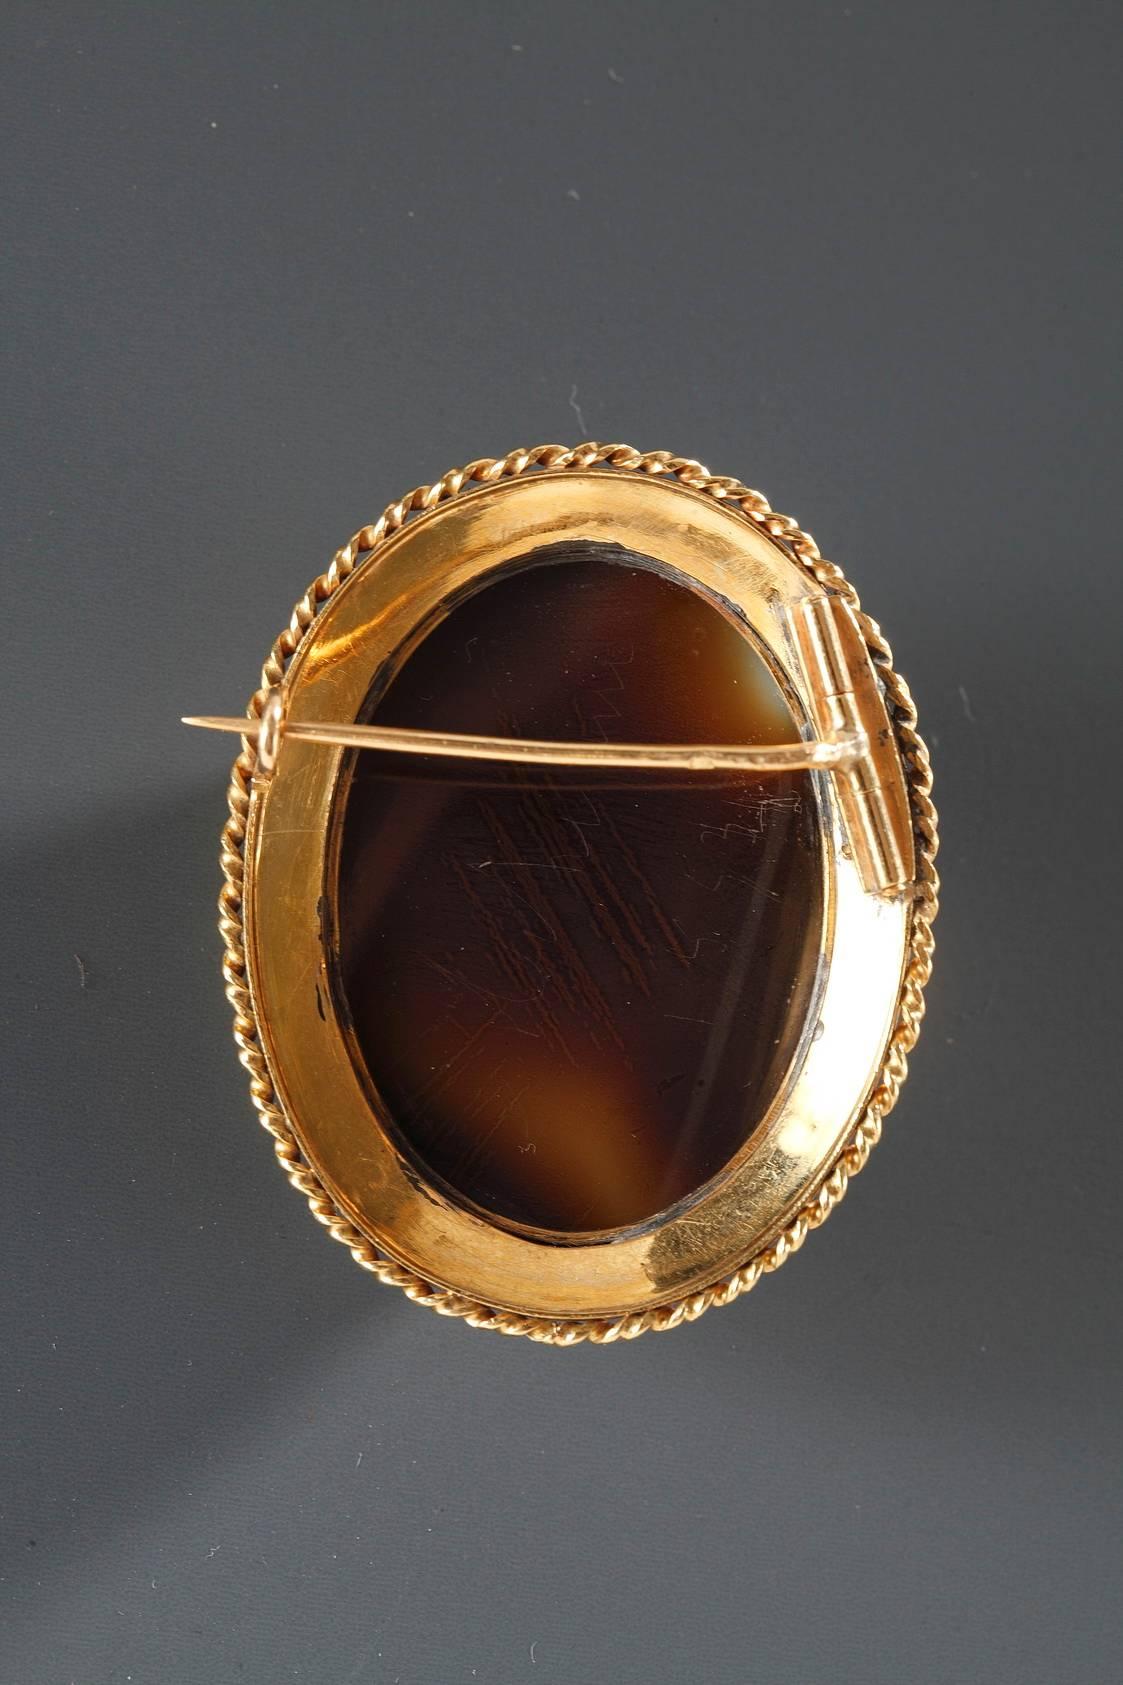 19th century oval agate brooch. It depicts the profile of a woman wearing a necklace and diamond earrings, set within a golden frame and accented with a ring of pearls. The sculpting of this brooch is very finely done. French mark “tête d’aigle”